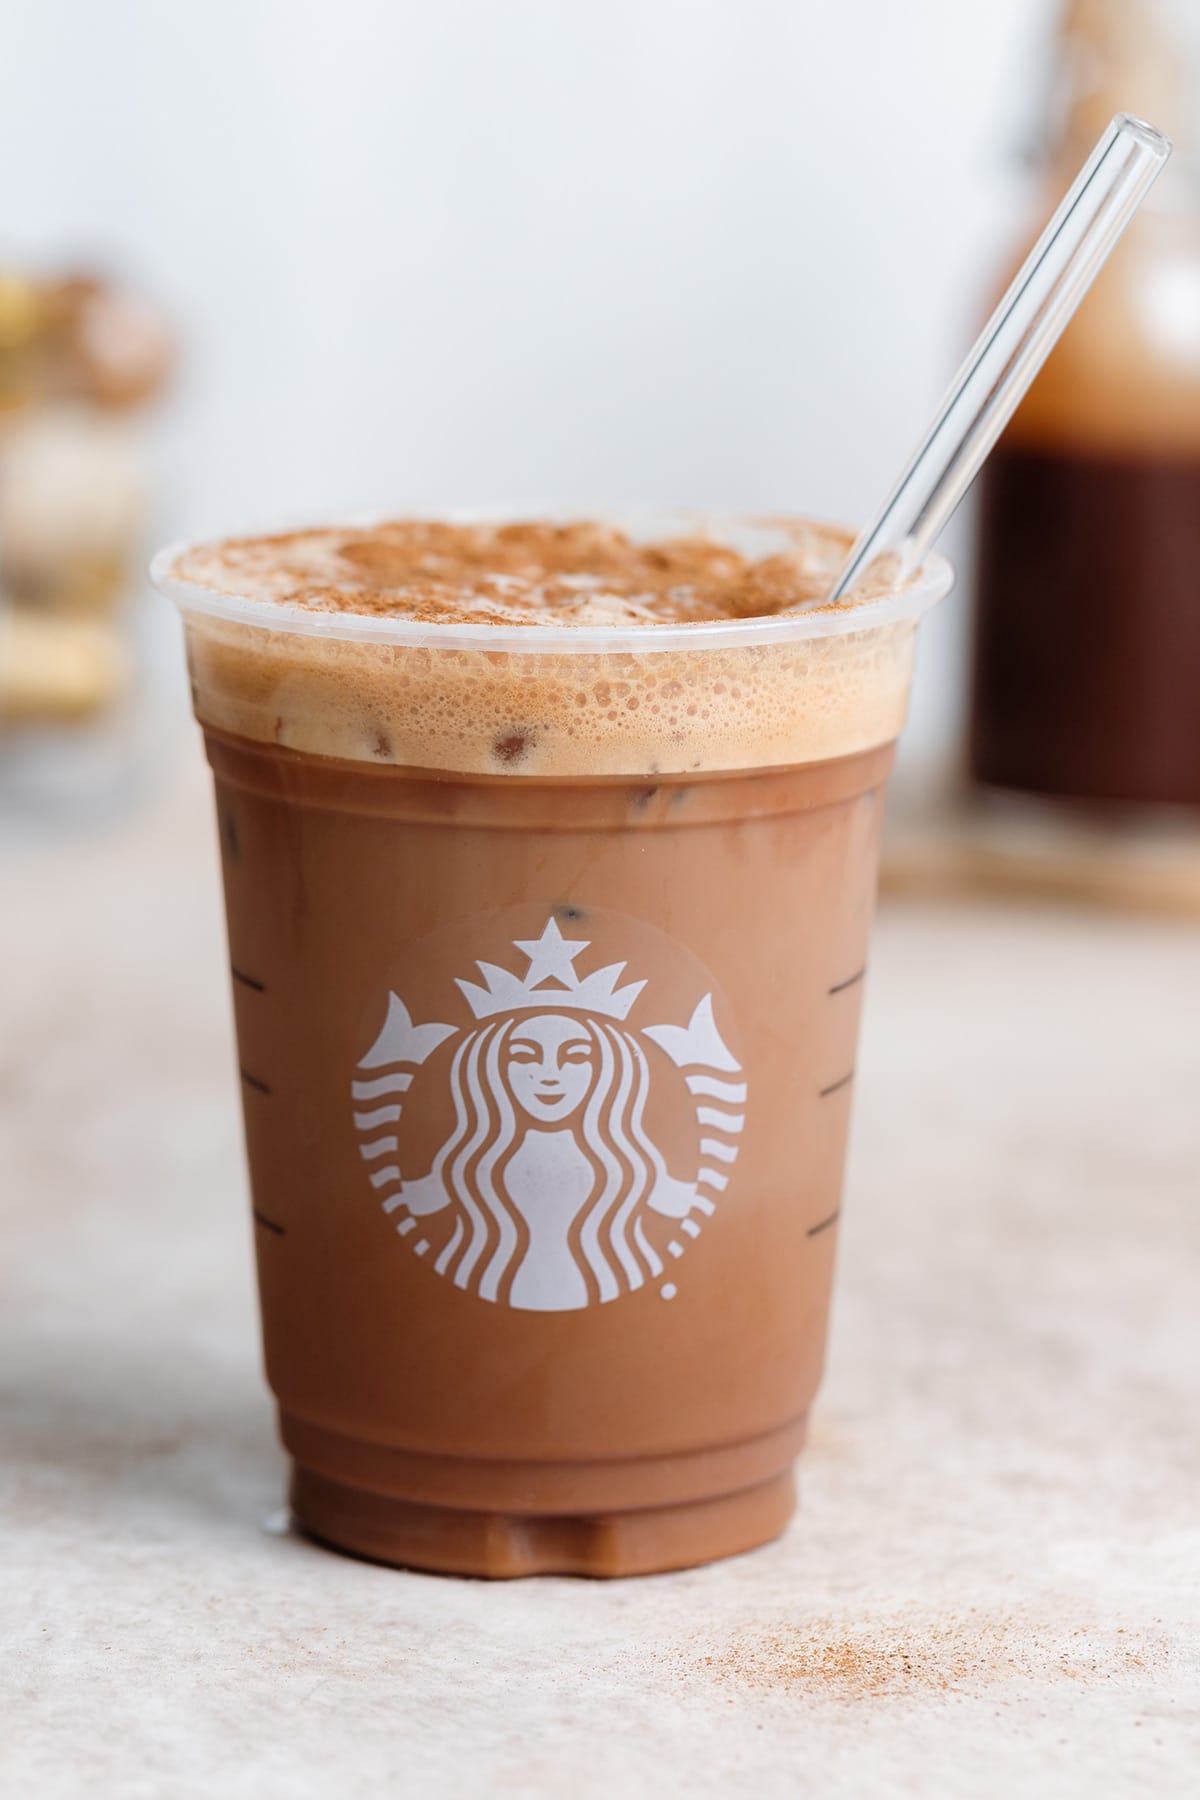 Chocolate shaken espresso with ice and a glass straw in a plastic Starbucks cup.